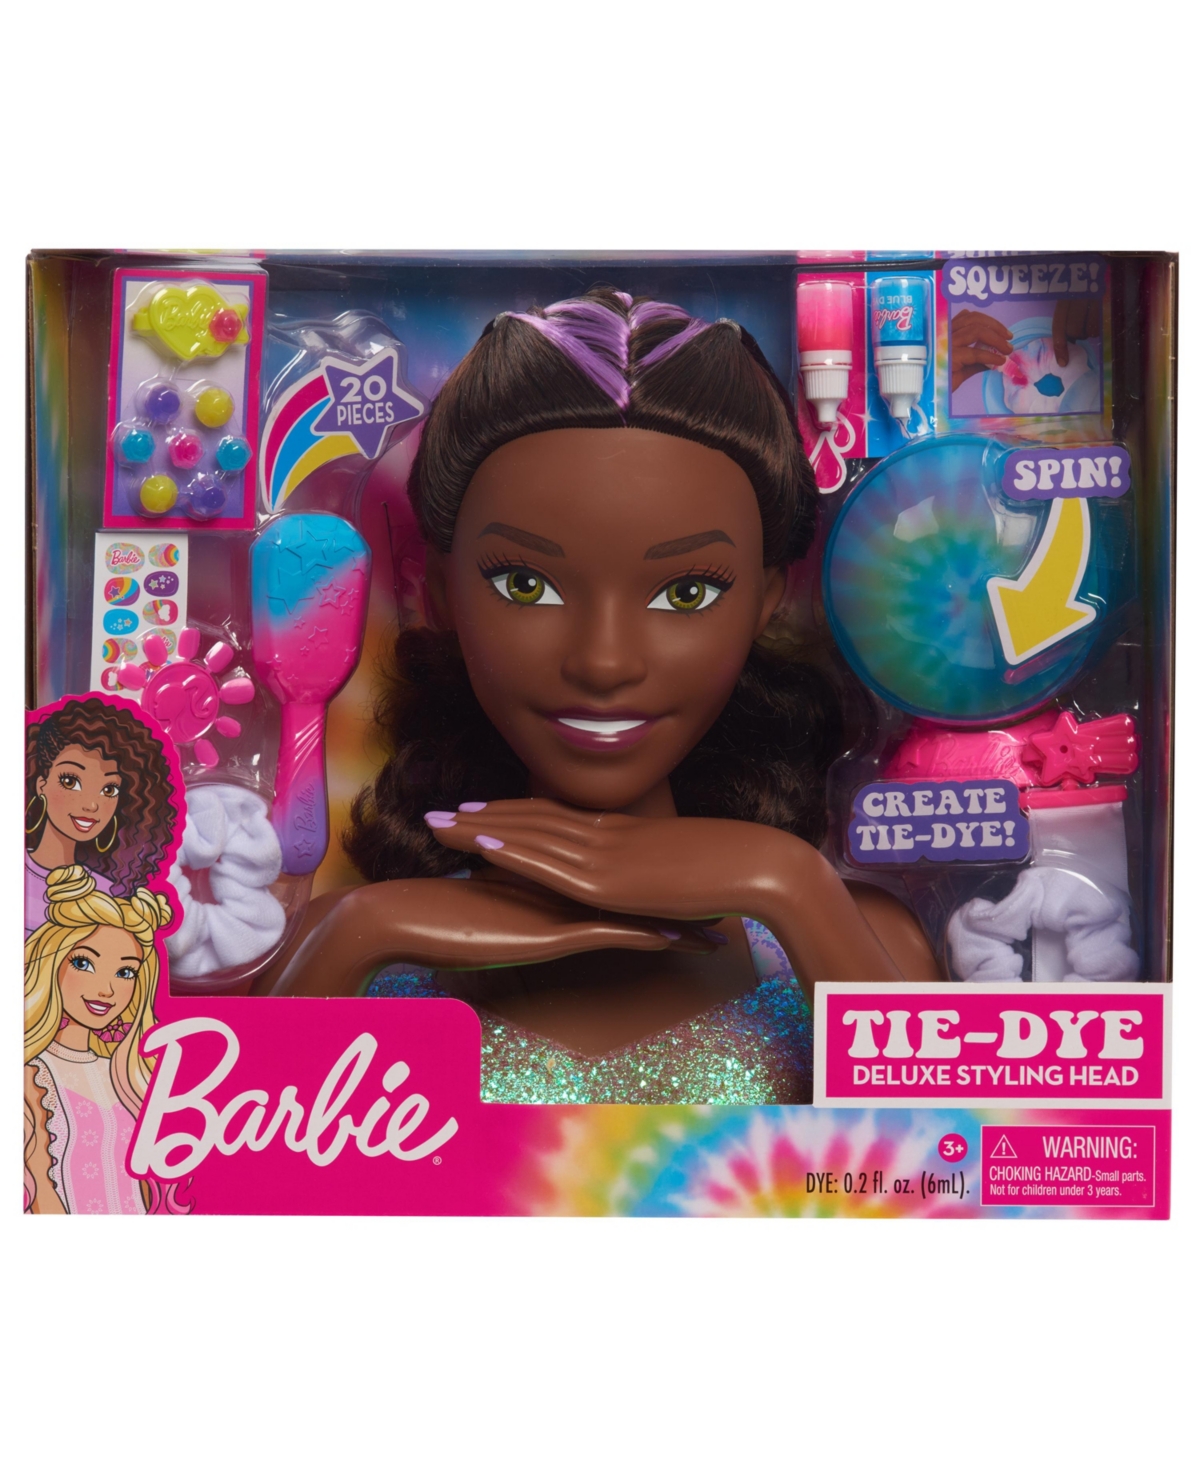 Barbie Tie-dye Deluxe Styling Head, Dark Brown Hair, Includes 2 Non-toxic Dye Colors In Pink